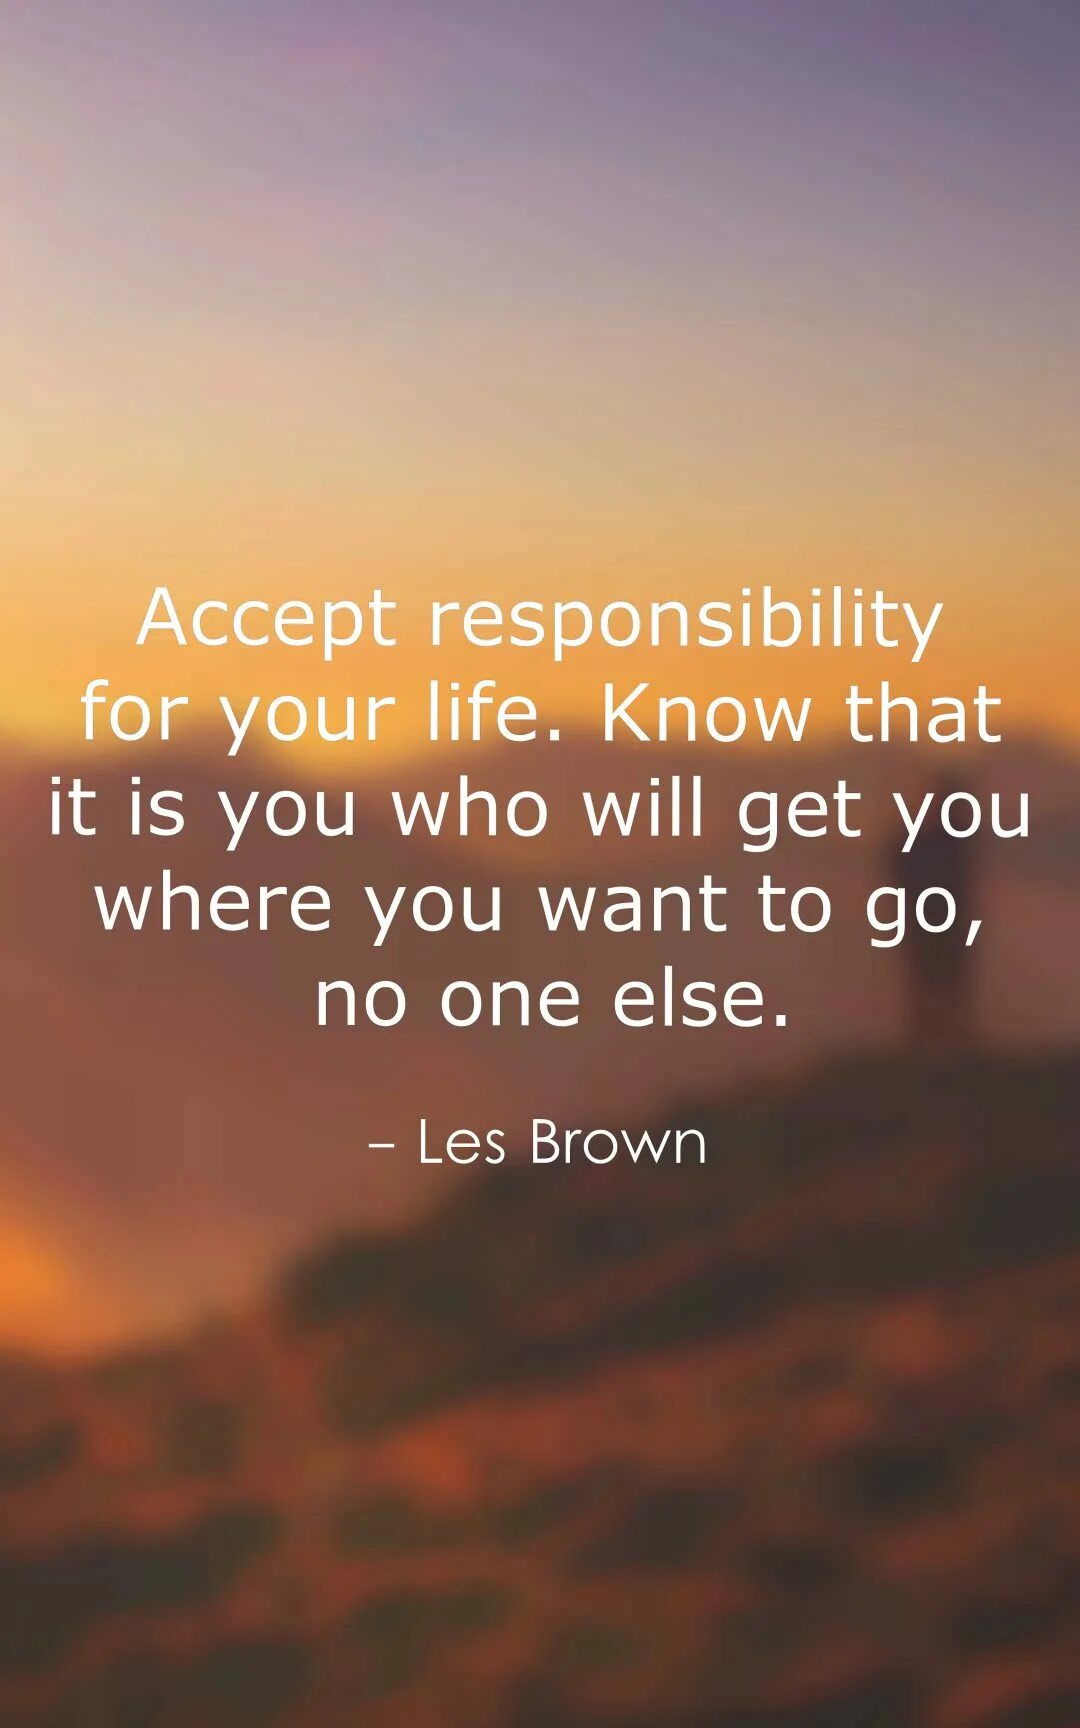 Quotes about responsibility. Responsibility quotes. You are responsible for you. CSR quotes. Accept take